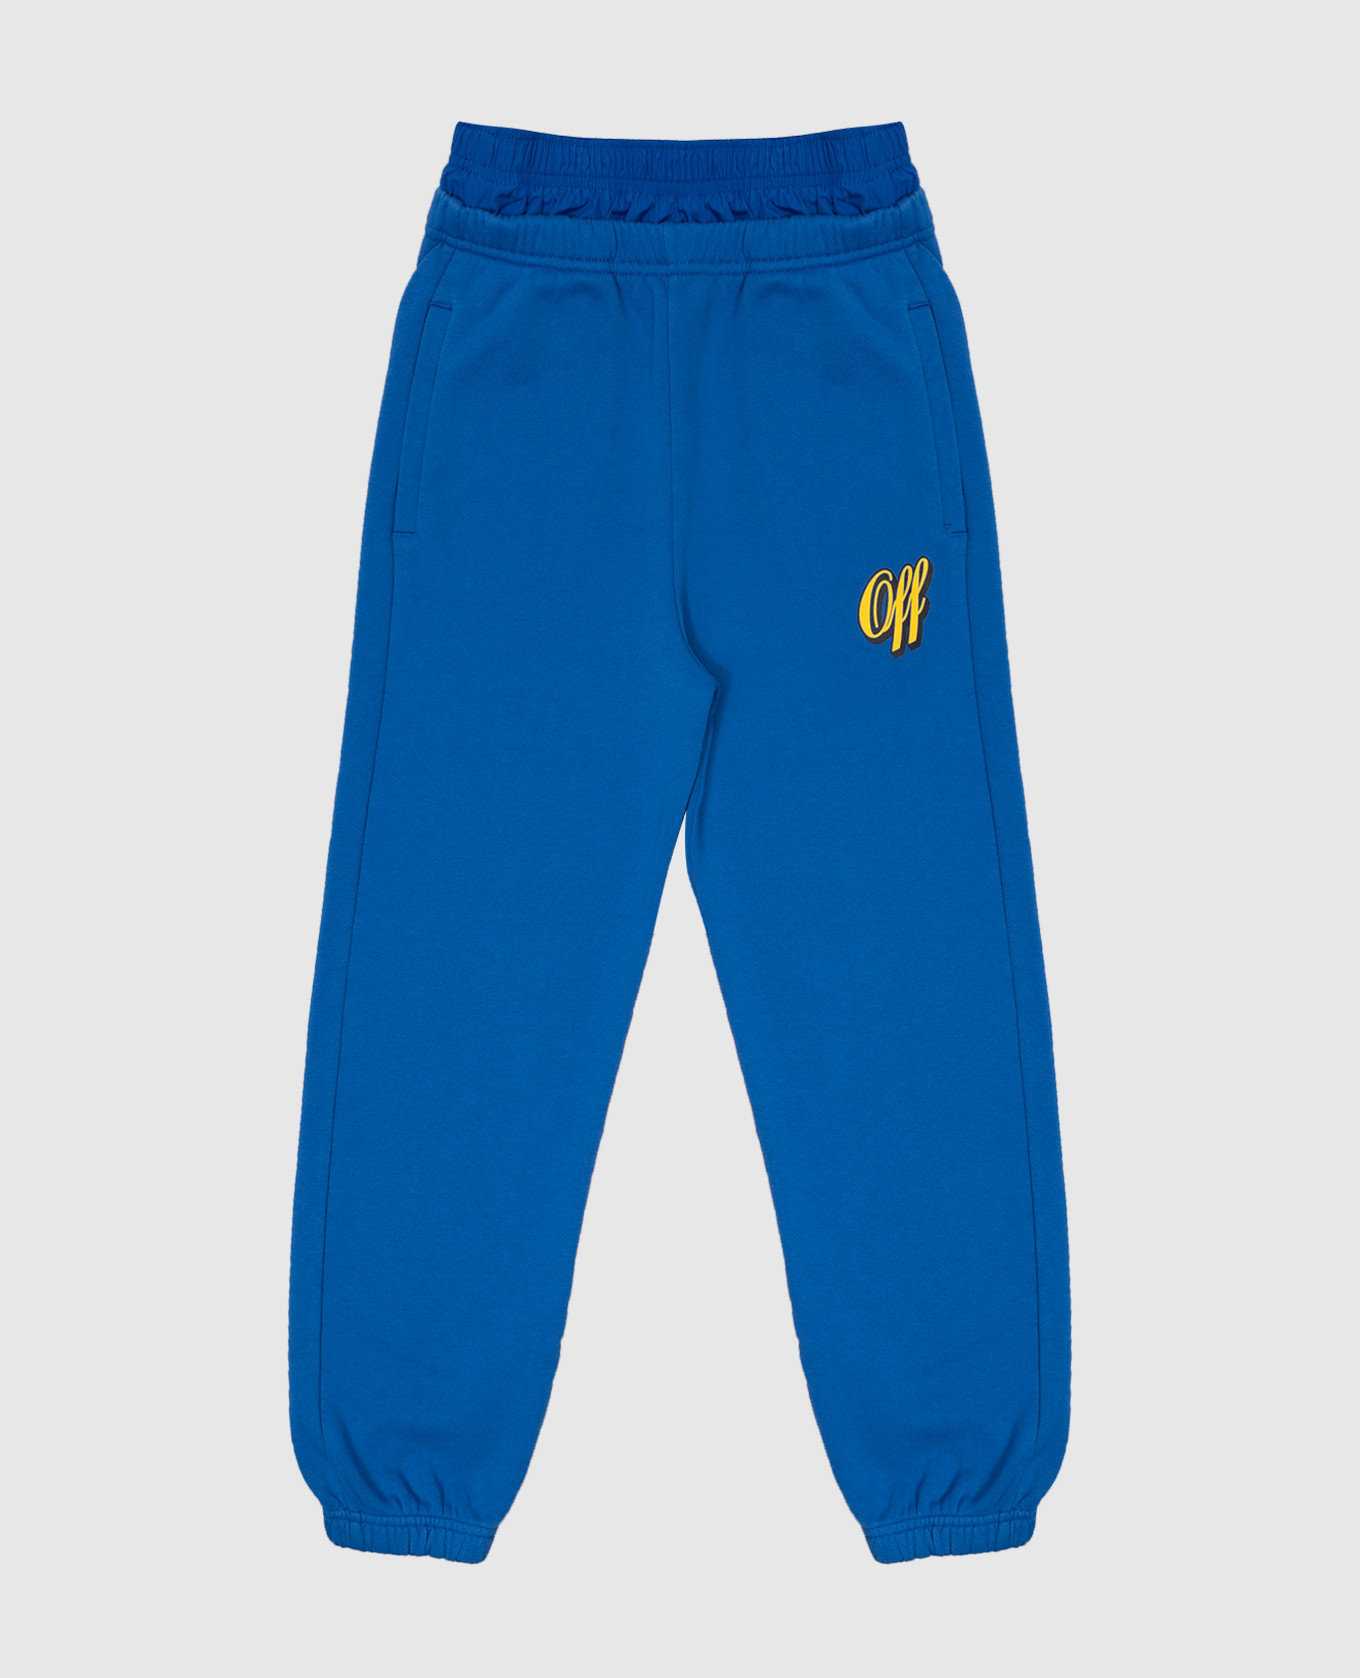 Children's blue joggers with logo